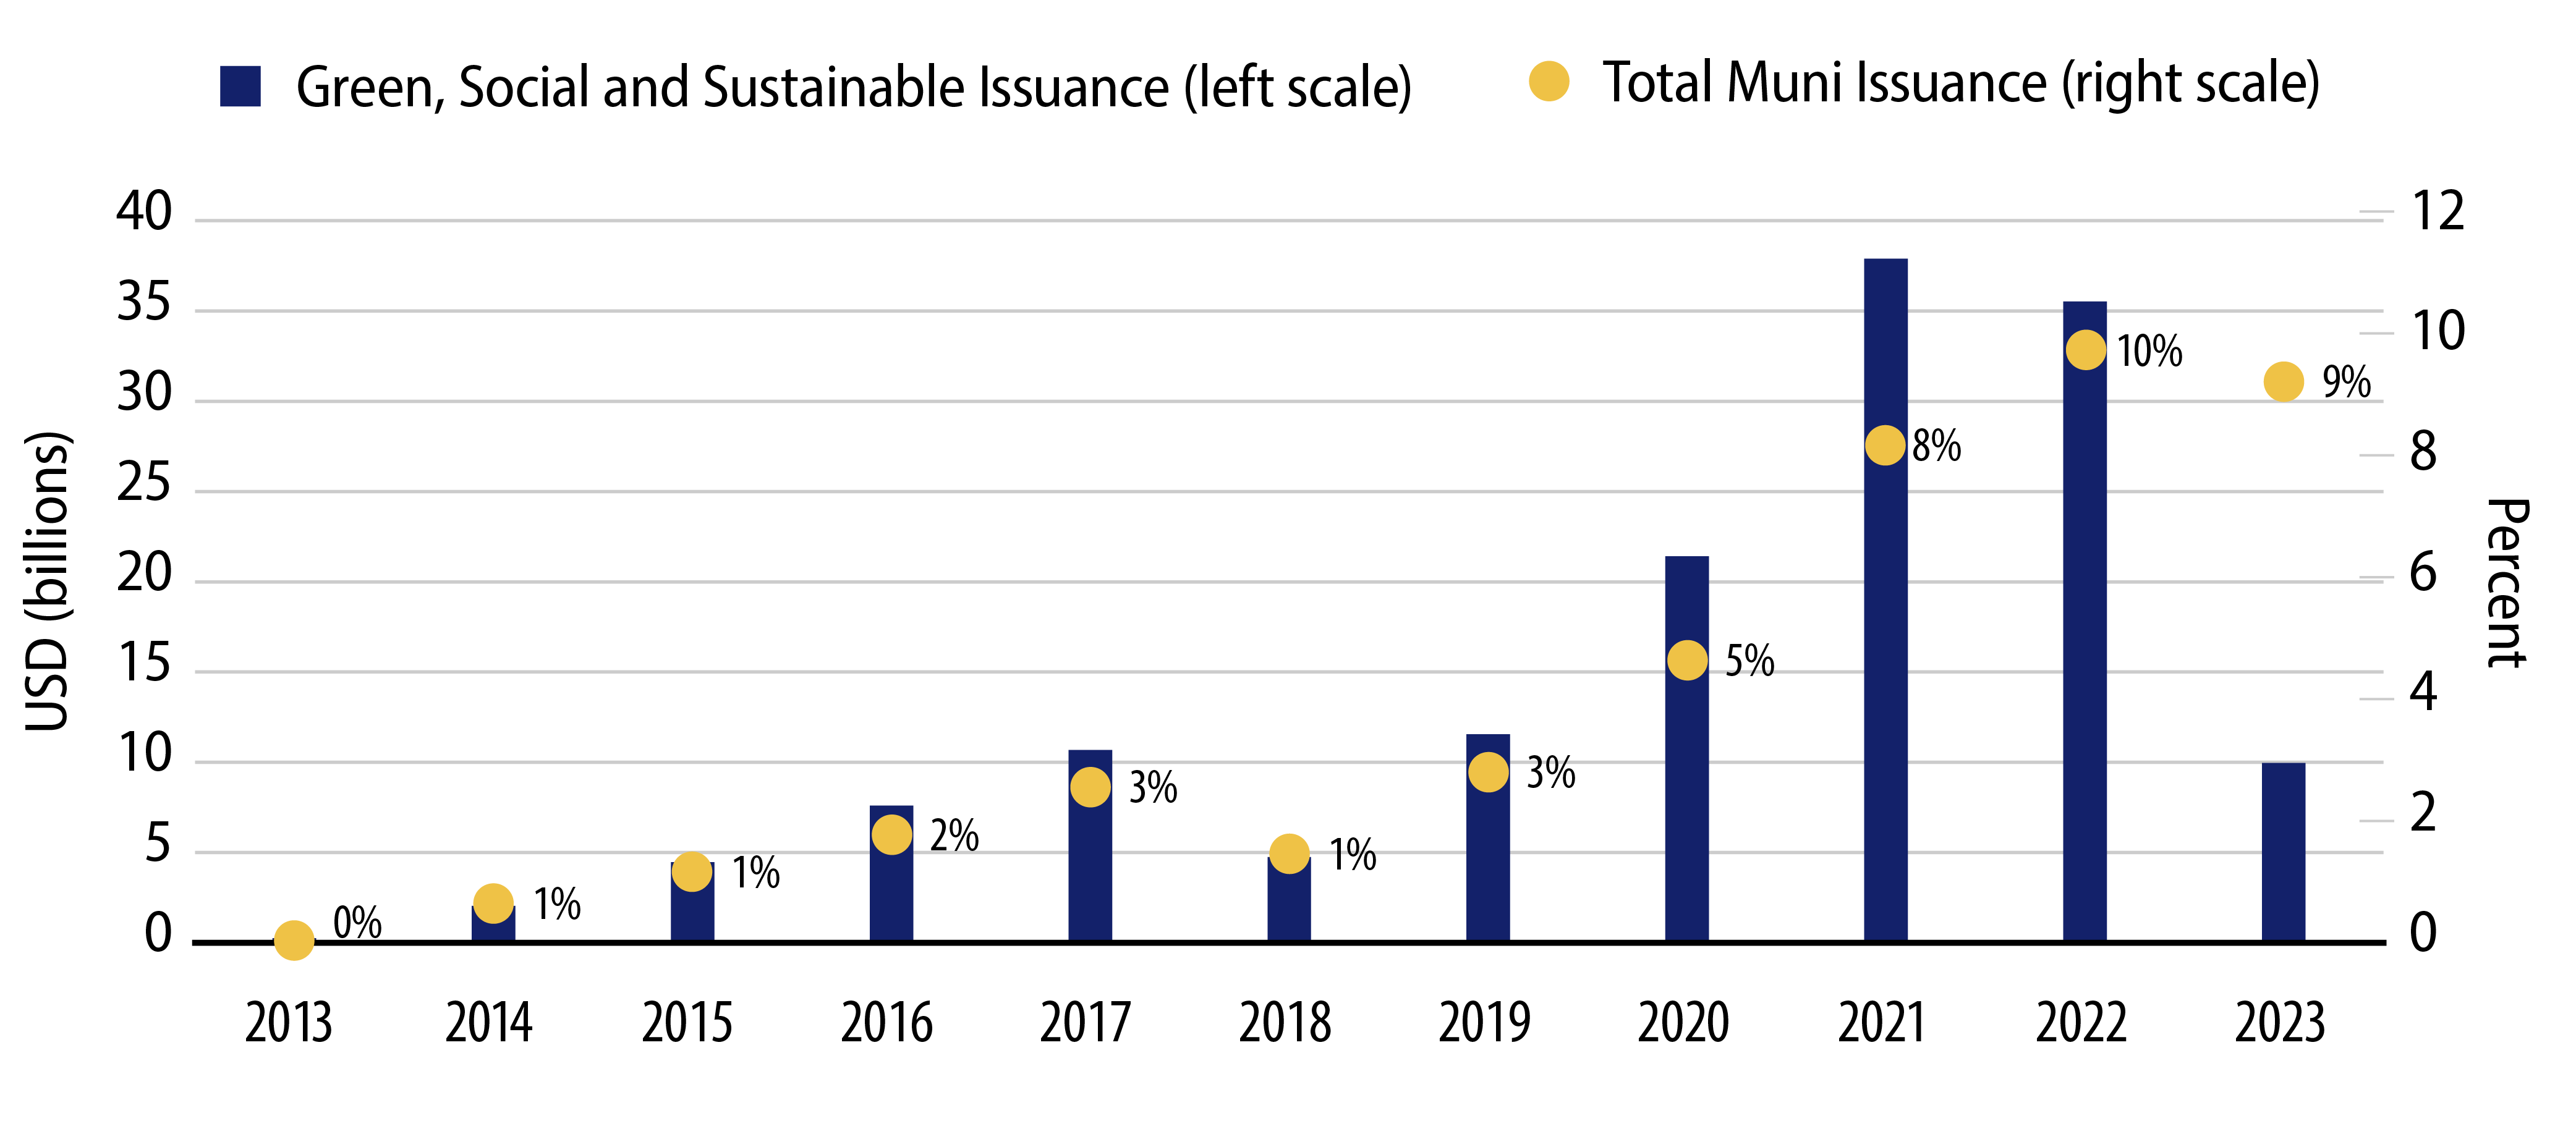 Explore Municipal Green, Social and Sustainable Issuance as a Percentage of Total Muni Issuance